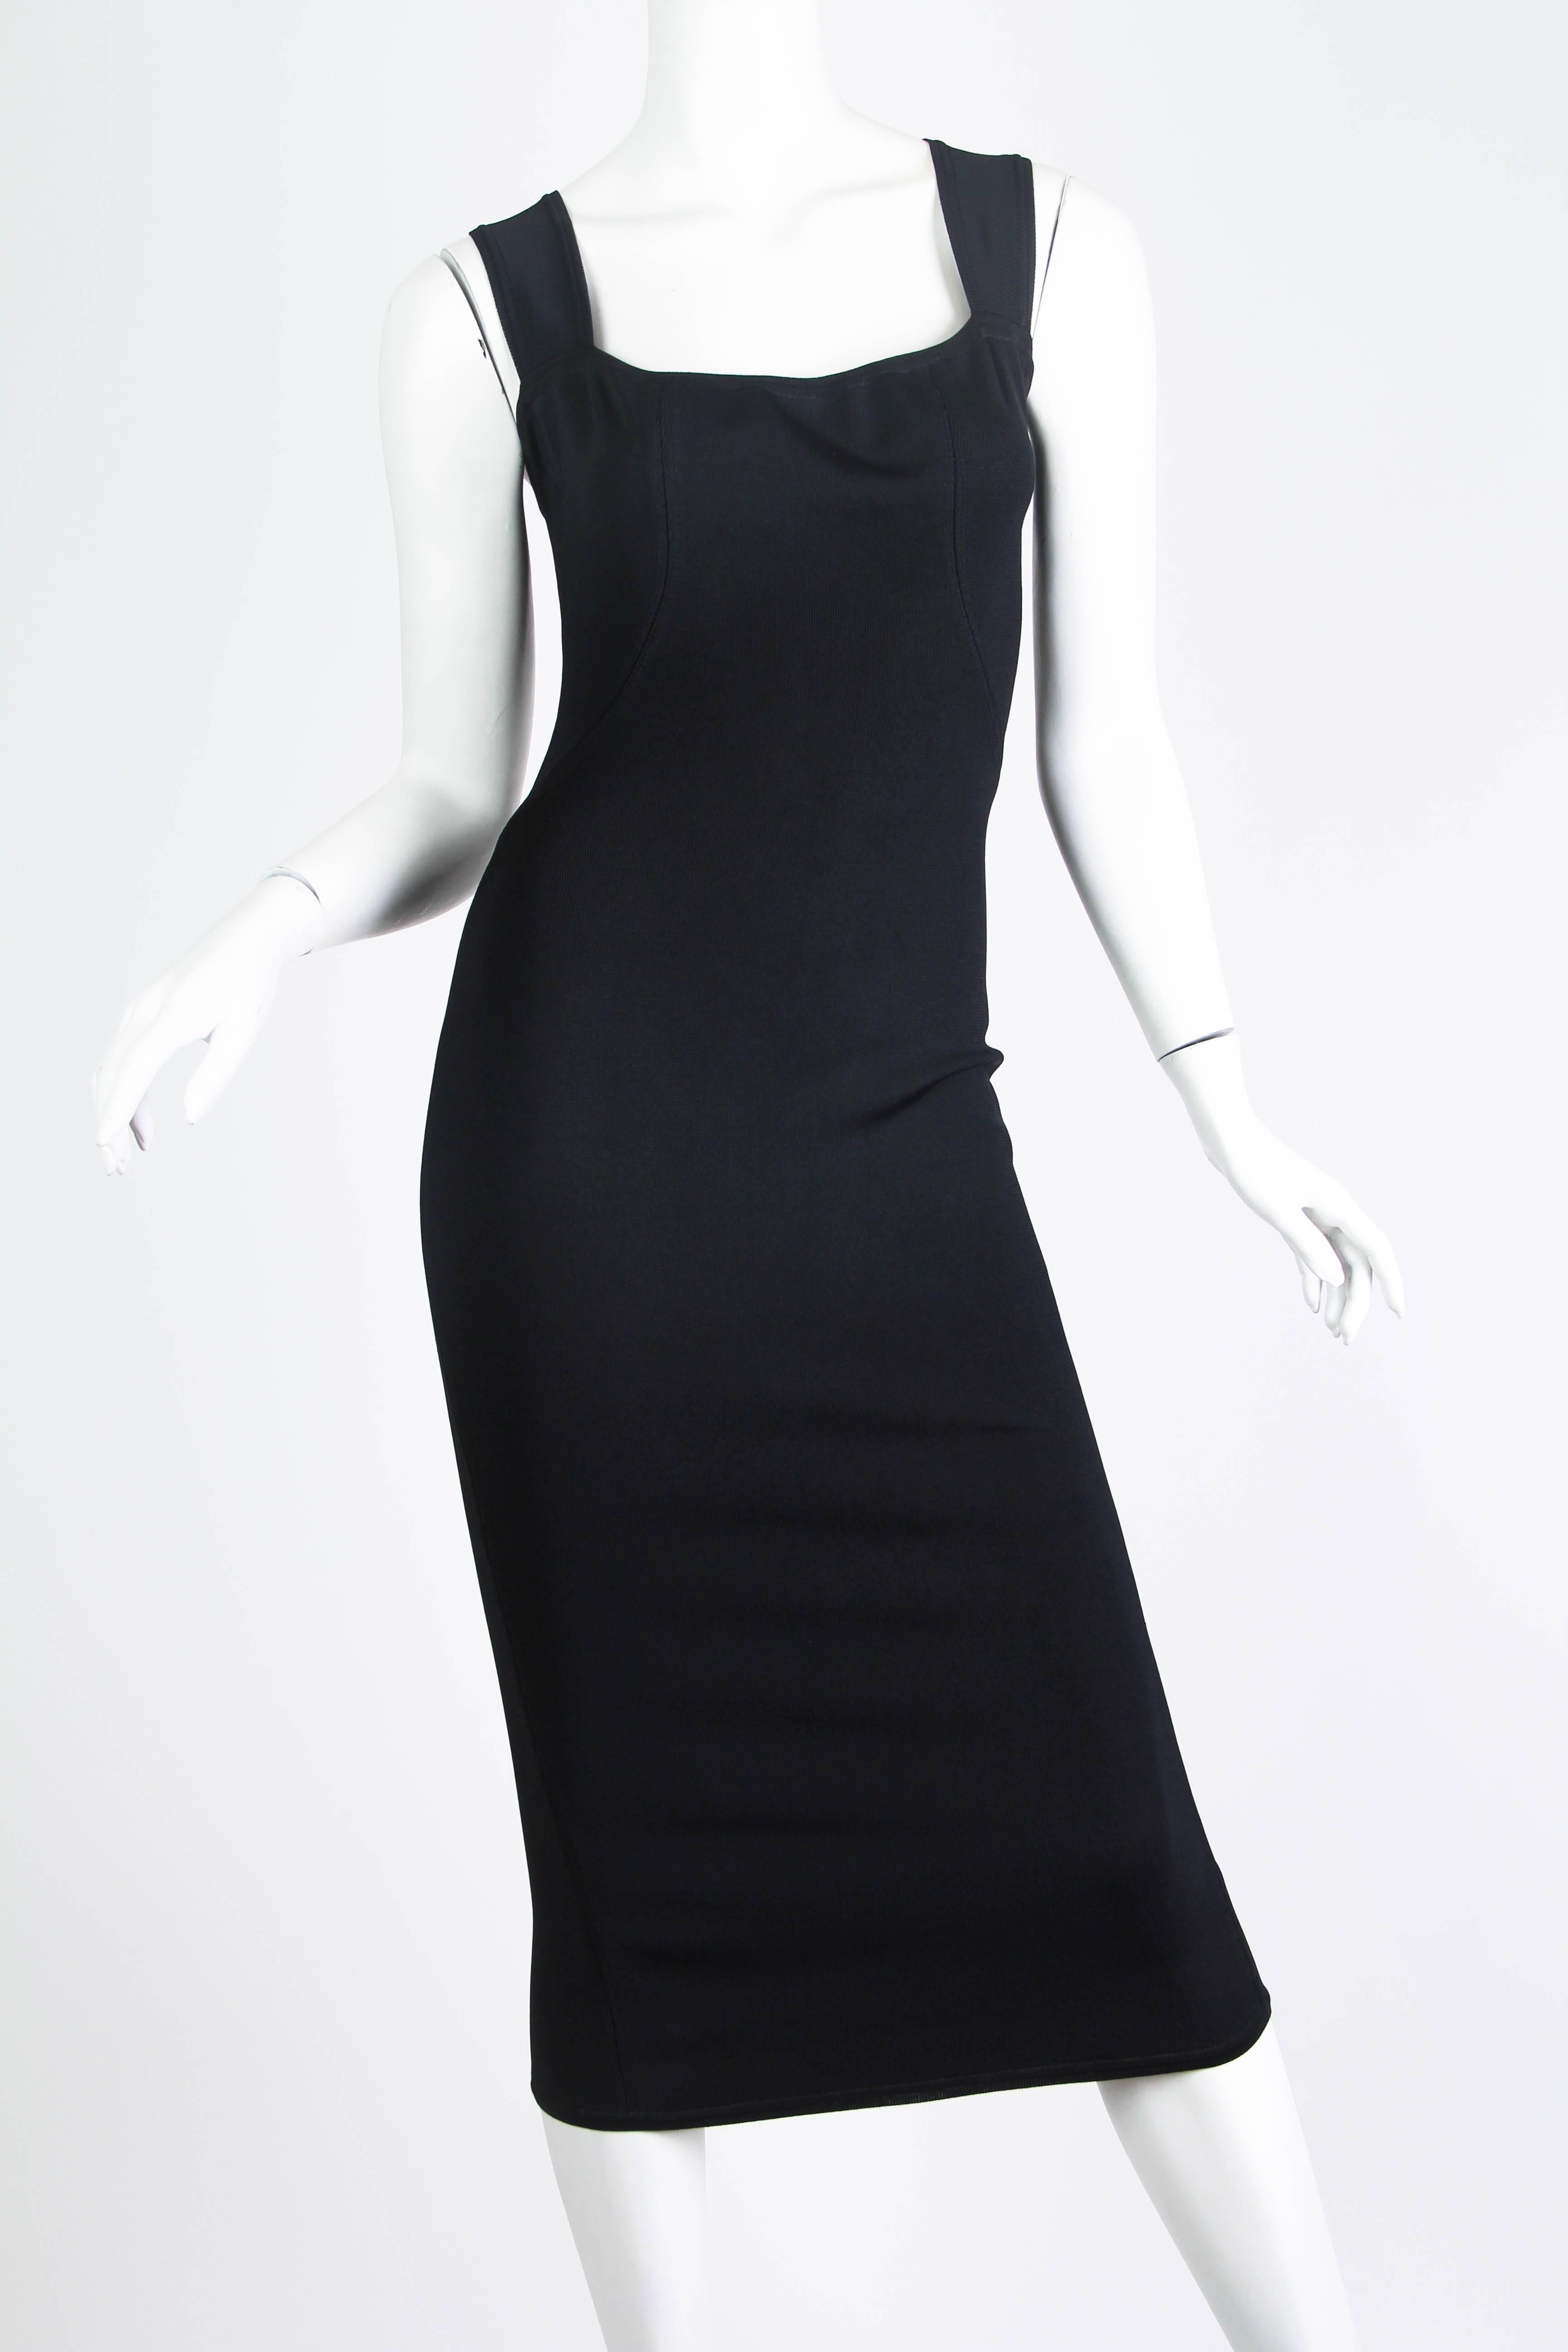 1980S AZZEDINE ALAIA  Sexy Open Back Dress In Excellent Condition For Sale In New York, NY